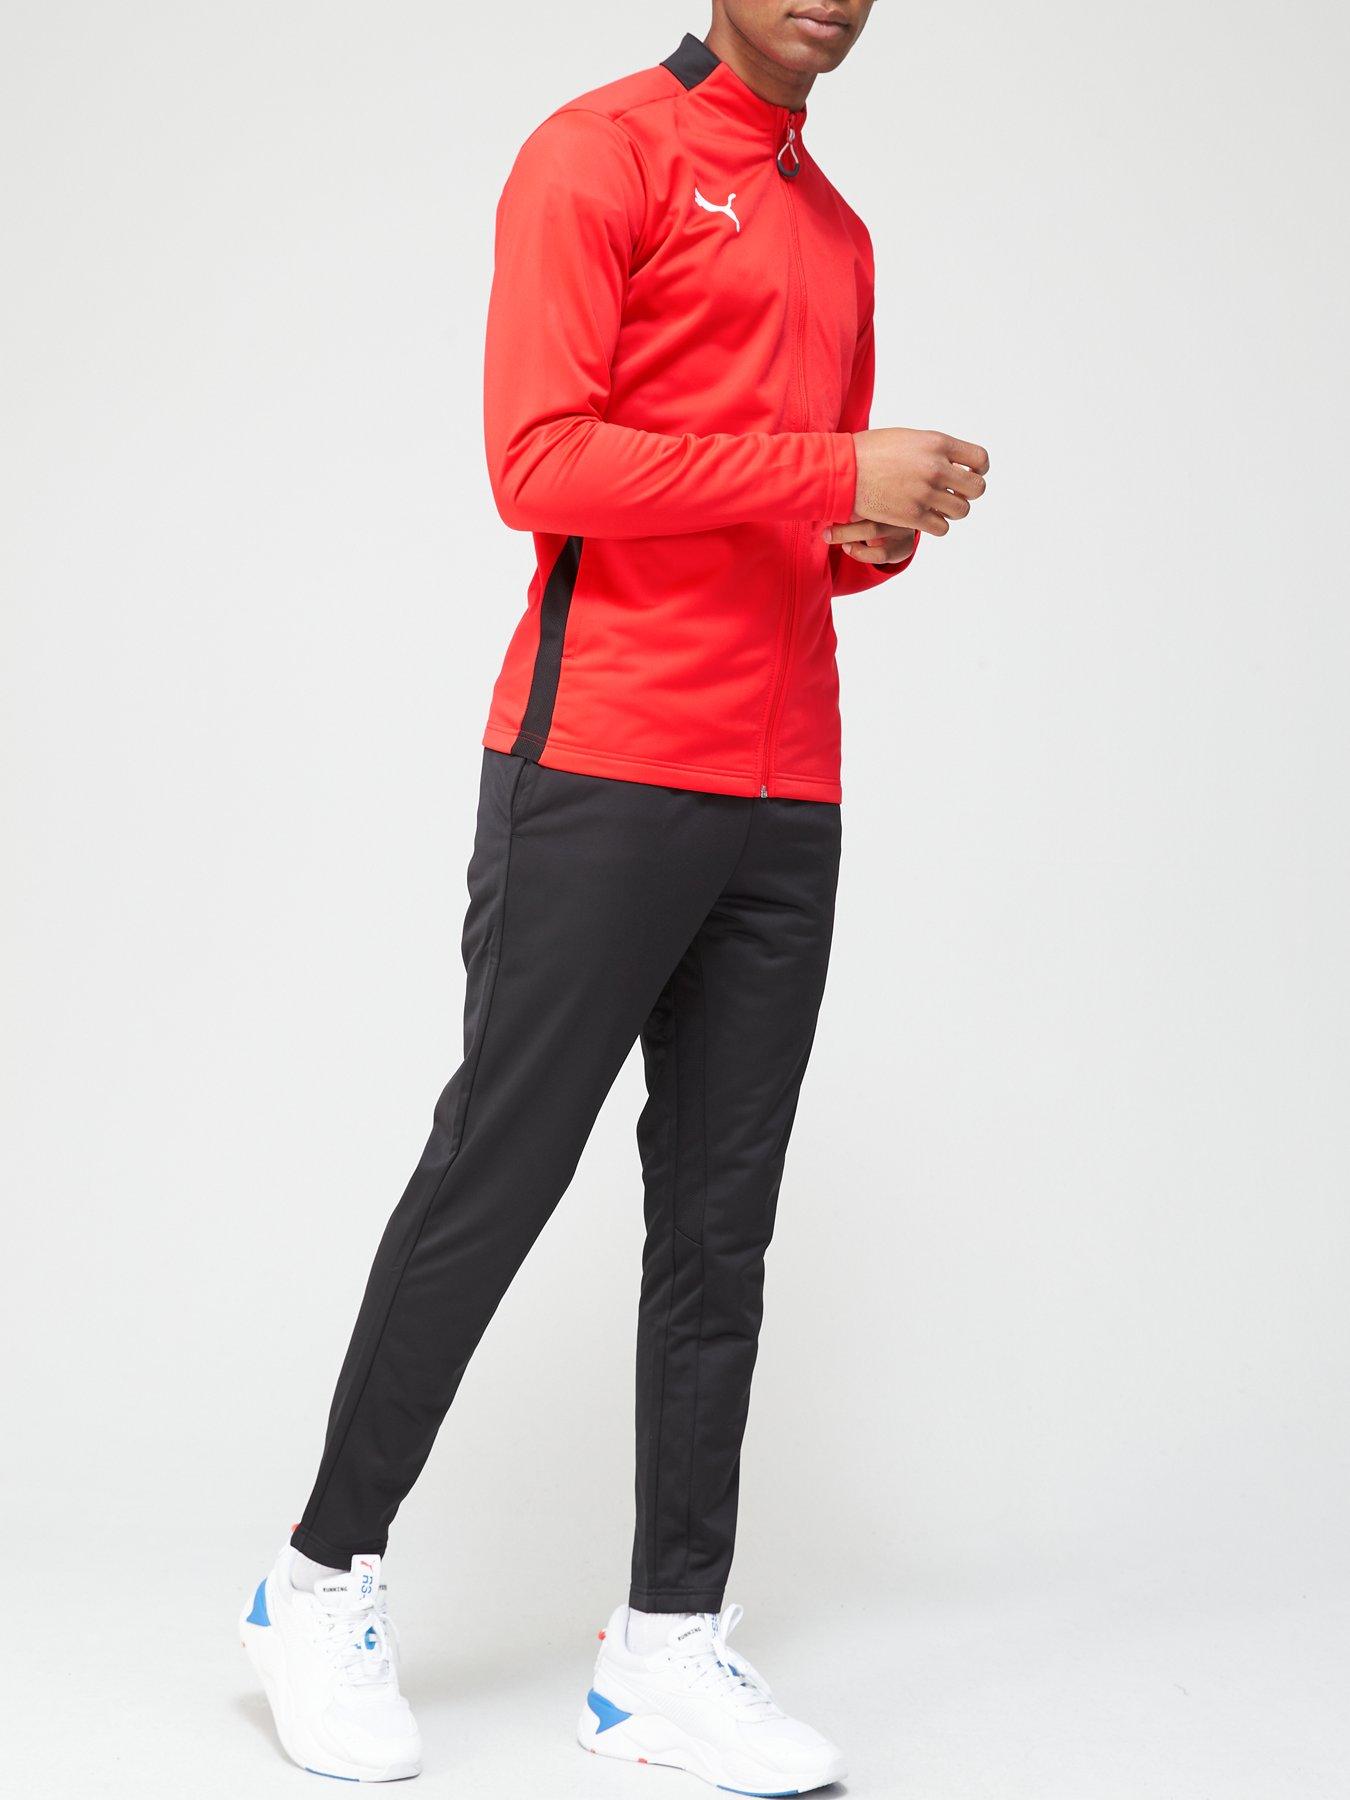  Football Play Tracksuit - Red/Black